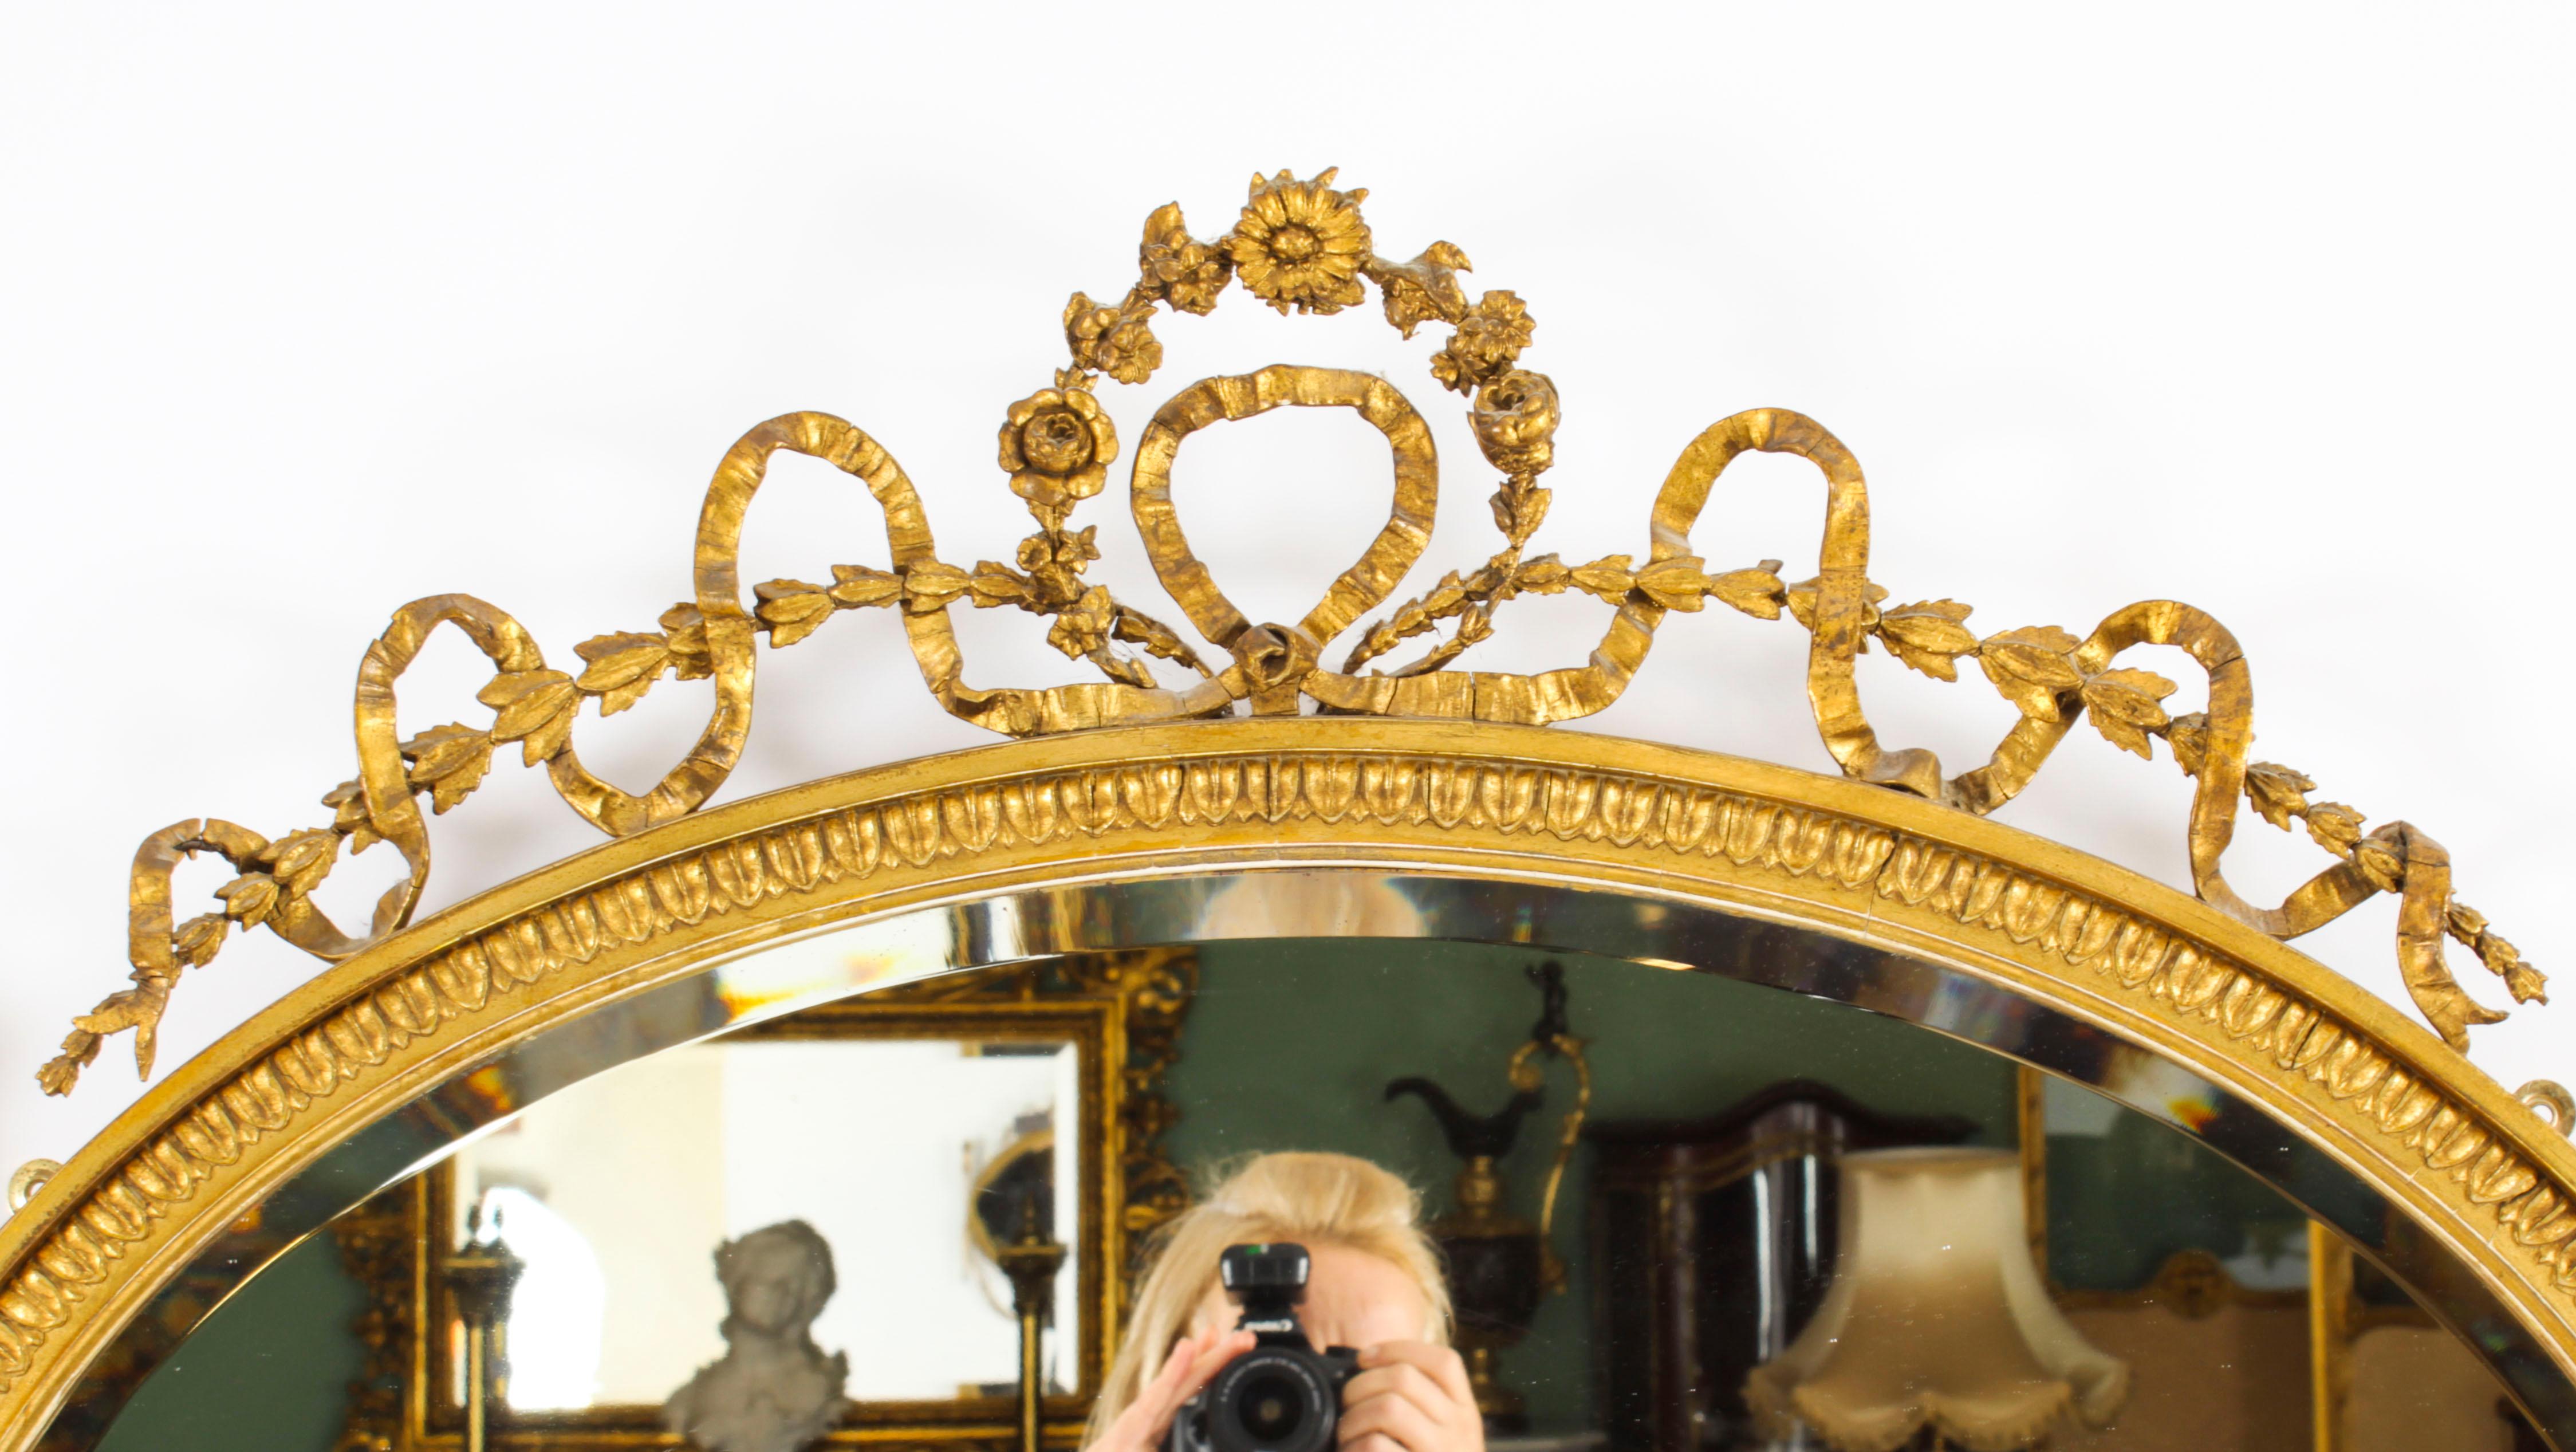 This is an exquisite antique Sheraton Revival oval hand carved giltwood mirror, circa 1860 in date.
 
The mirror features an oval bevelled mirror plate in a gadrooned frame decorated with trailing ribbons, blue bell flowers and flaming torches to